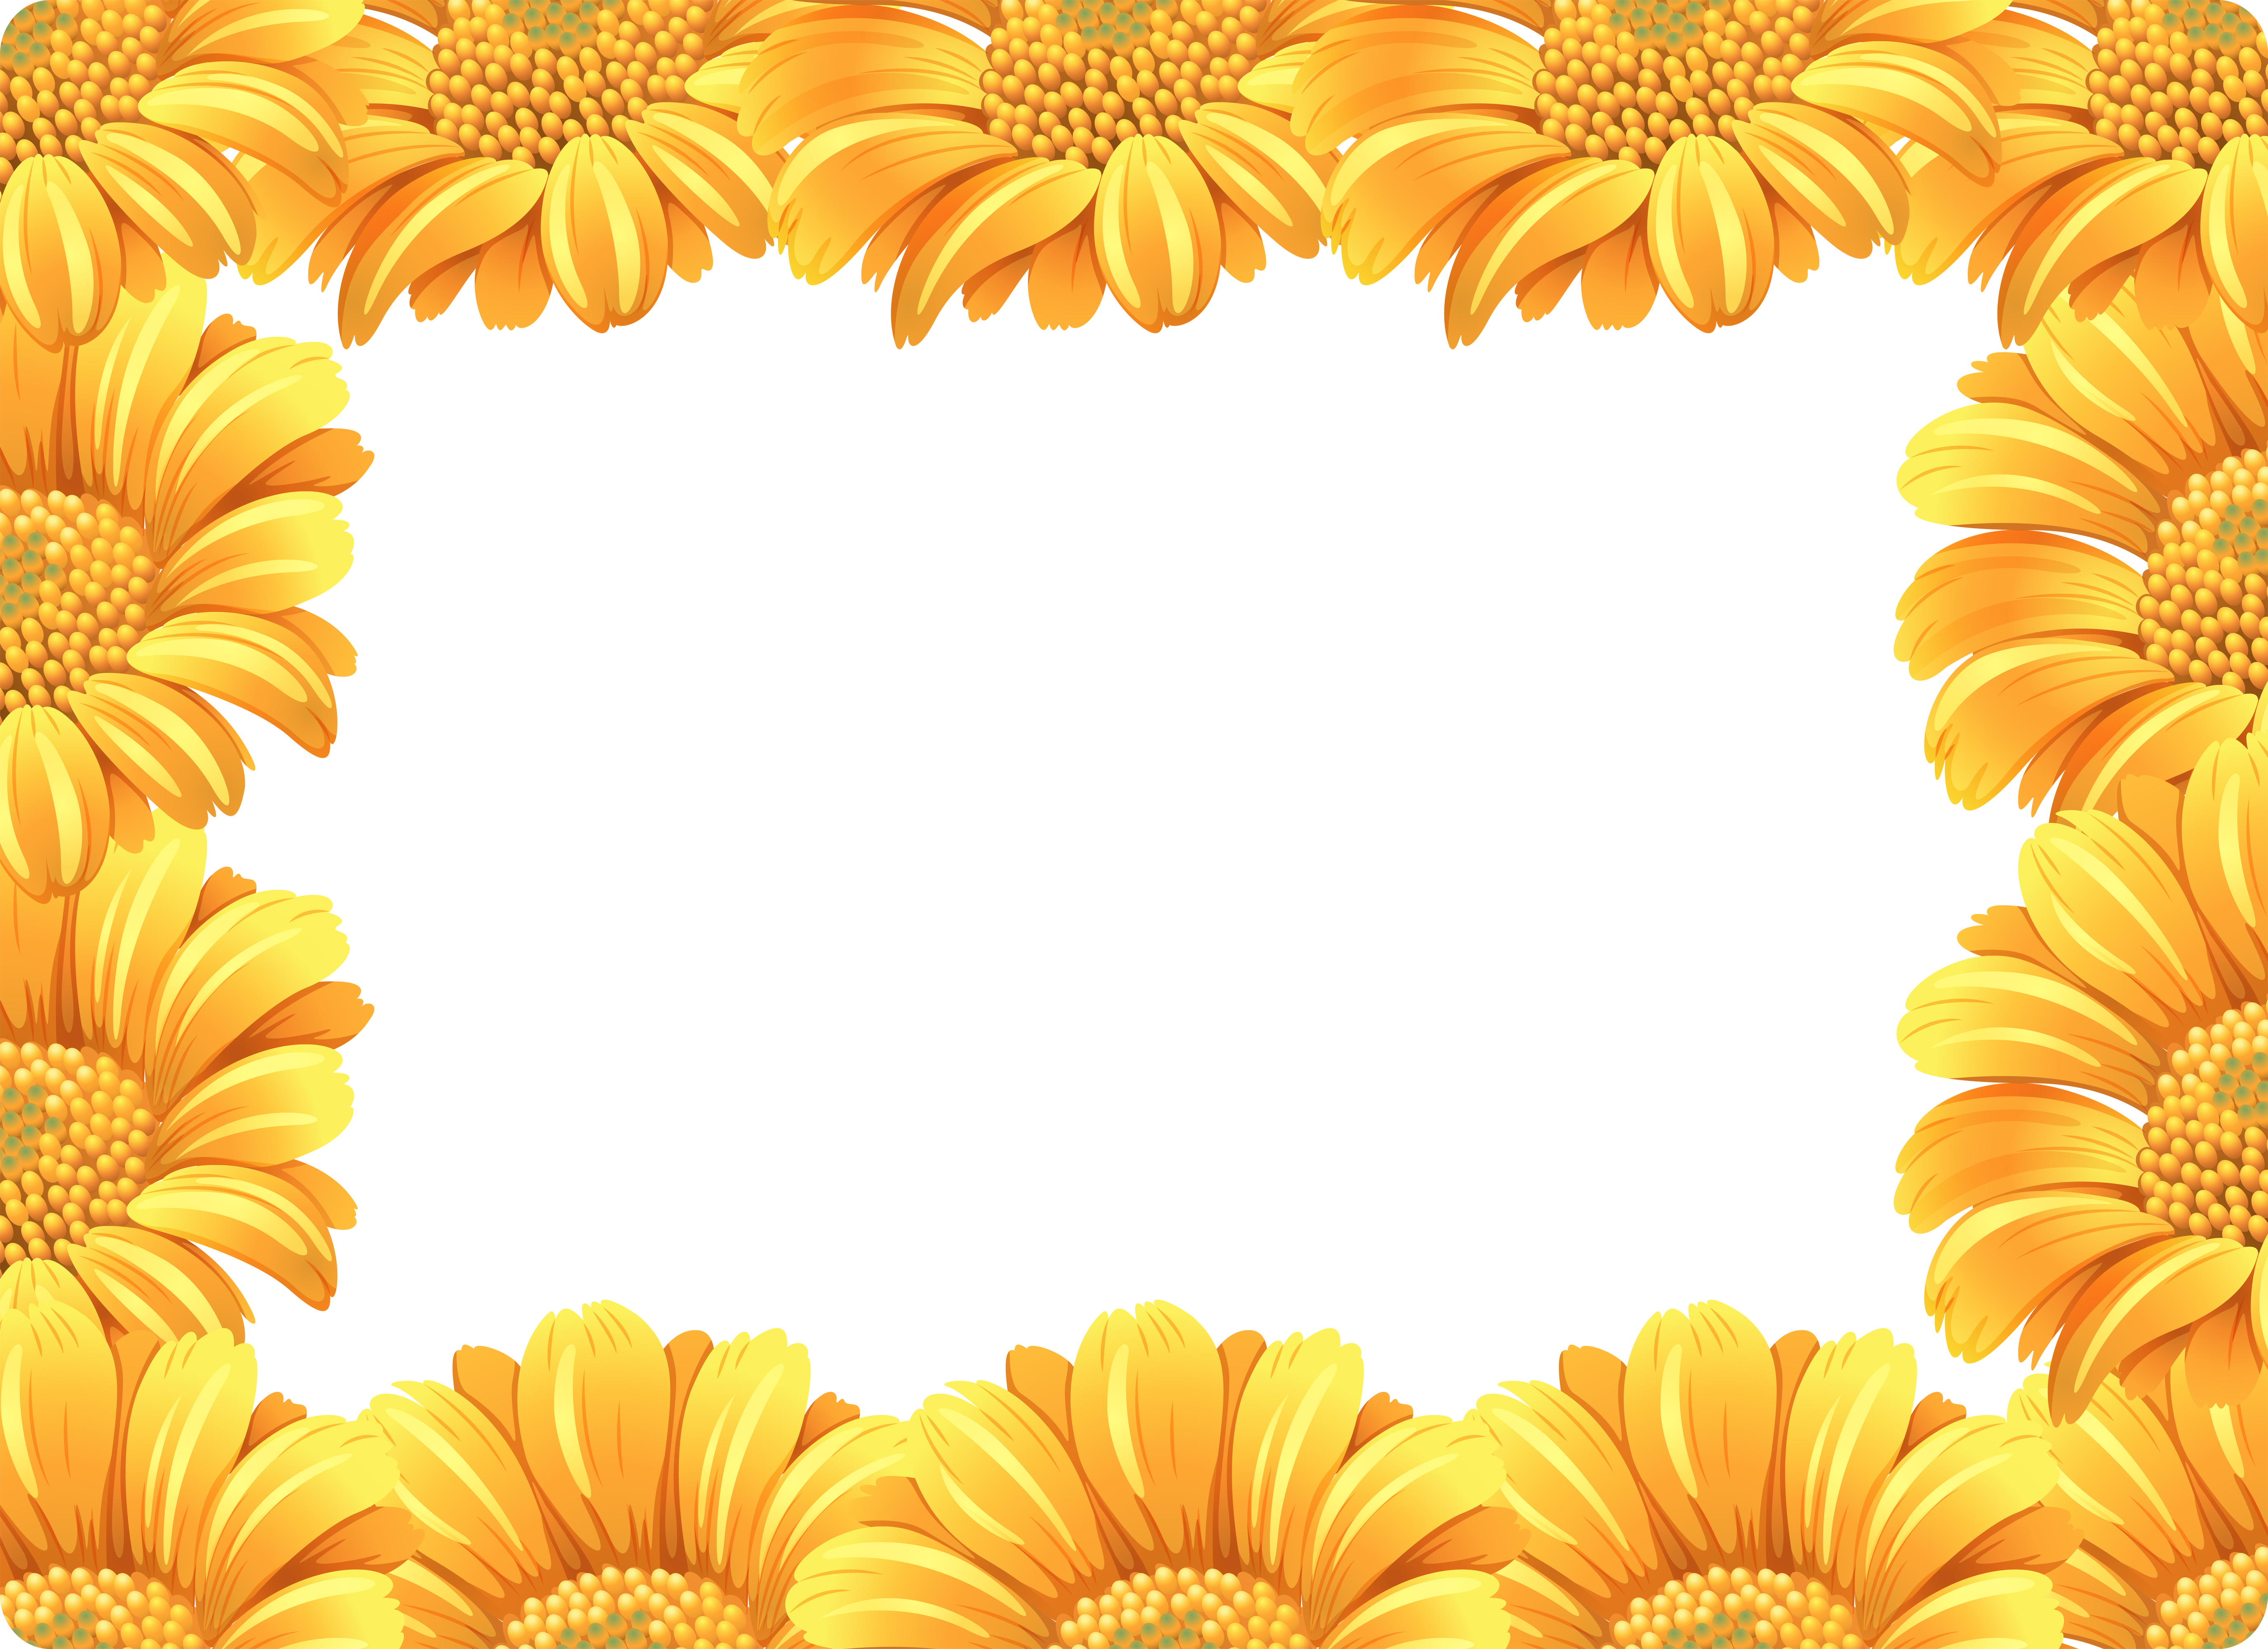 Download Yellow daisy flower border - Download Free Vectors ...